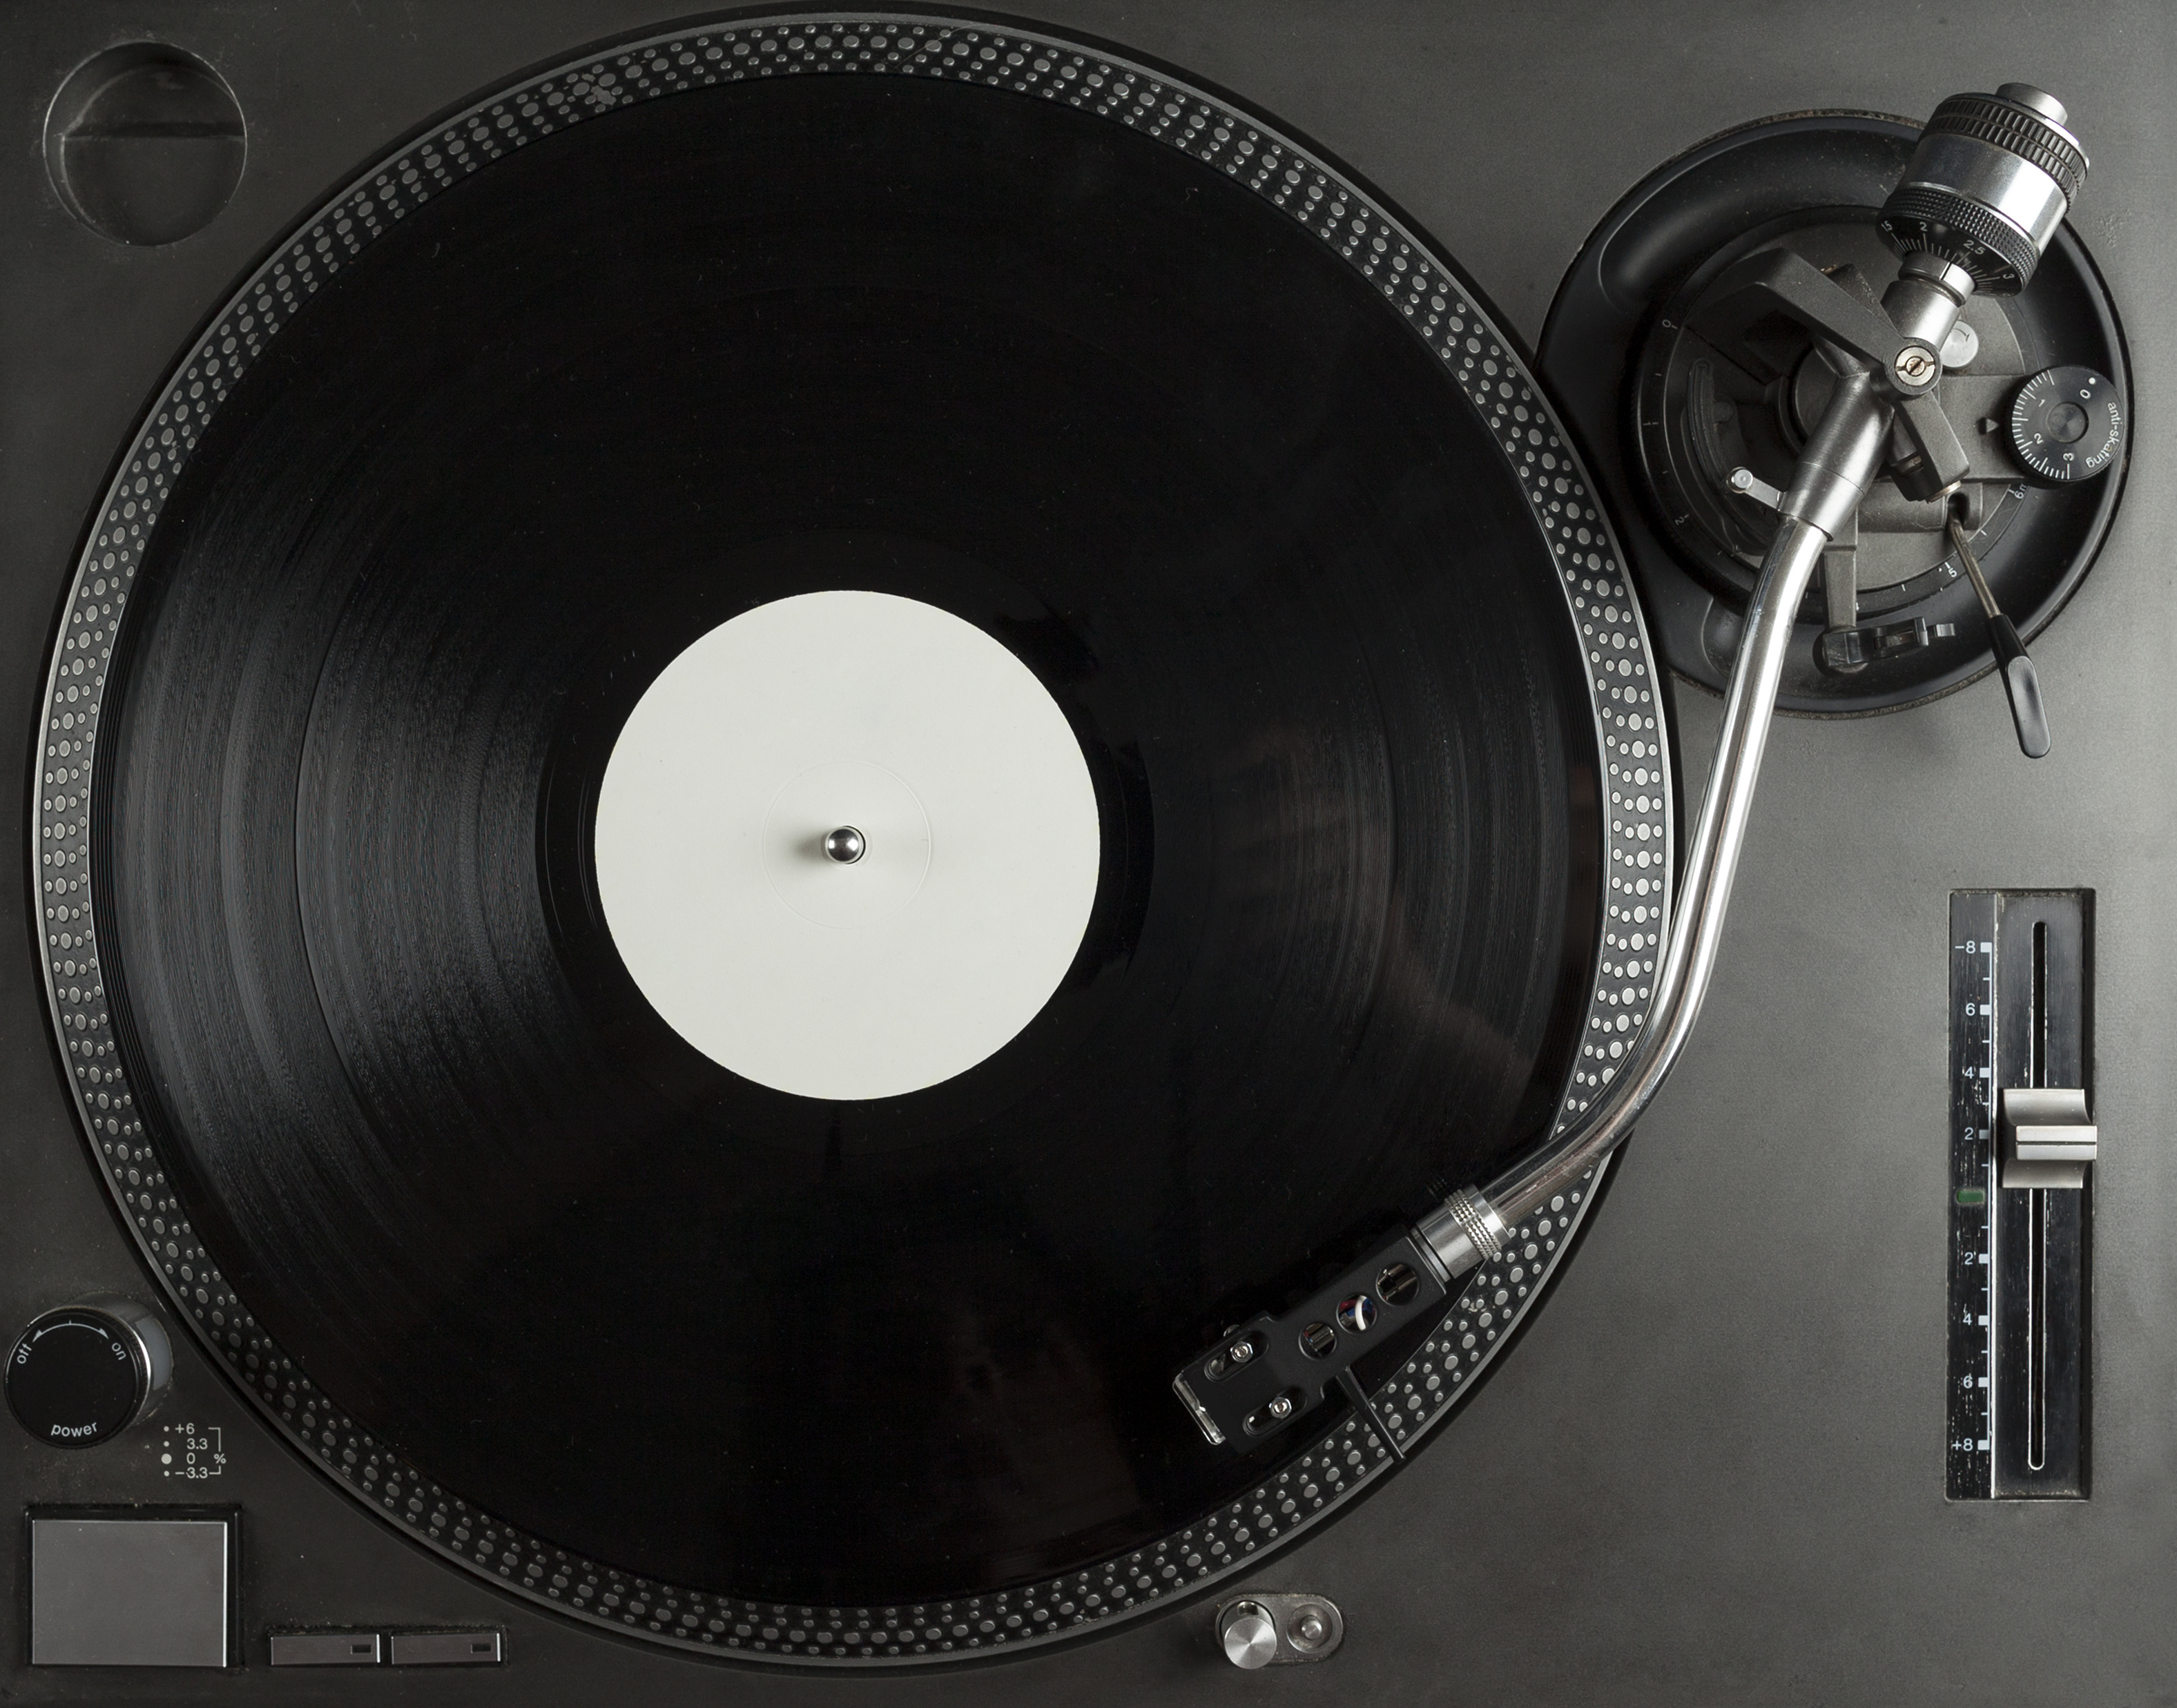 | Turntable playing vinyl close up with needle on the record